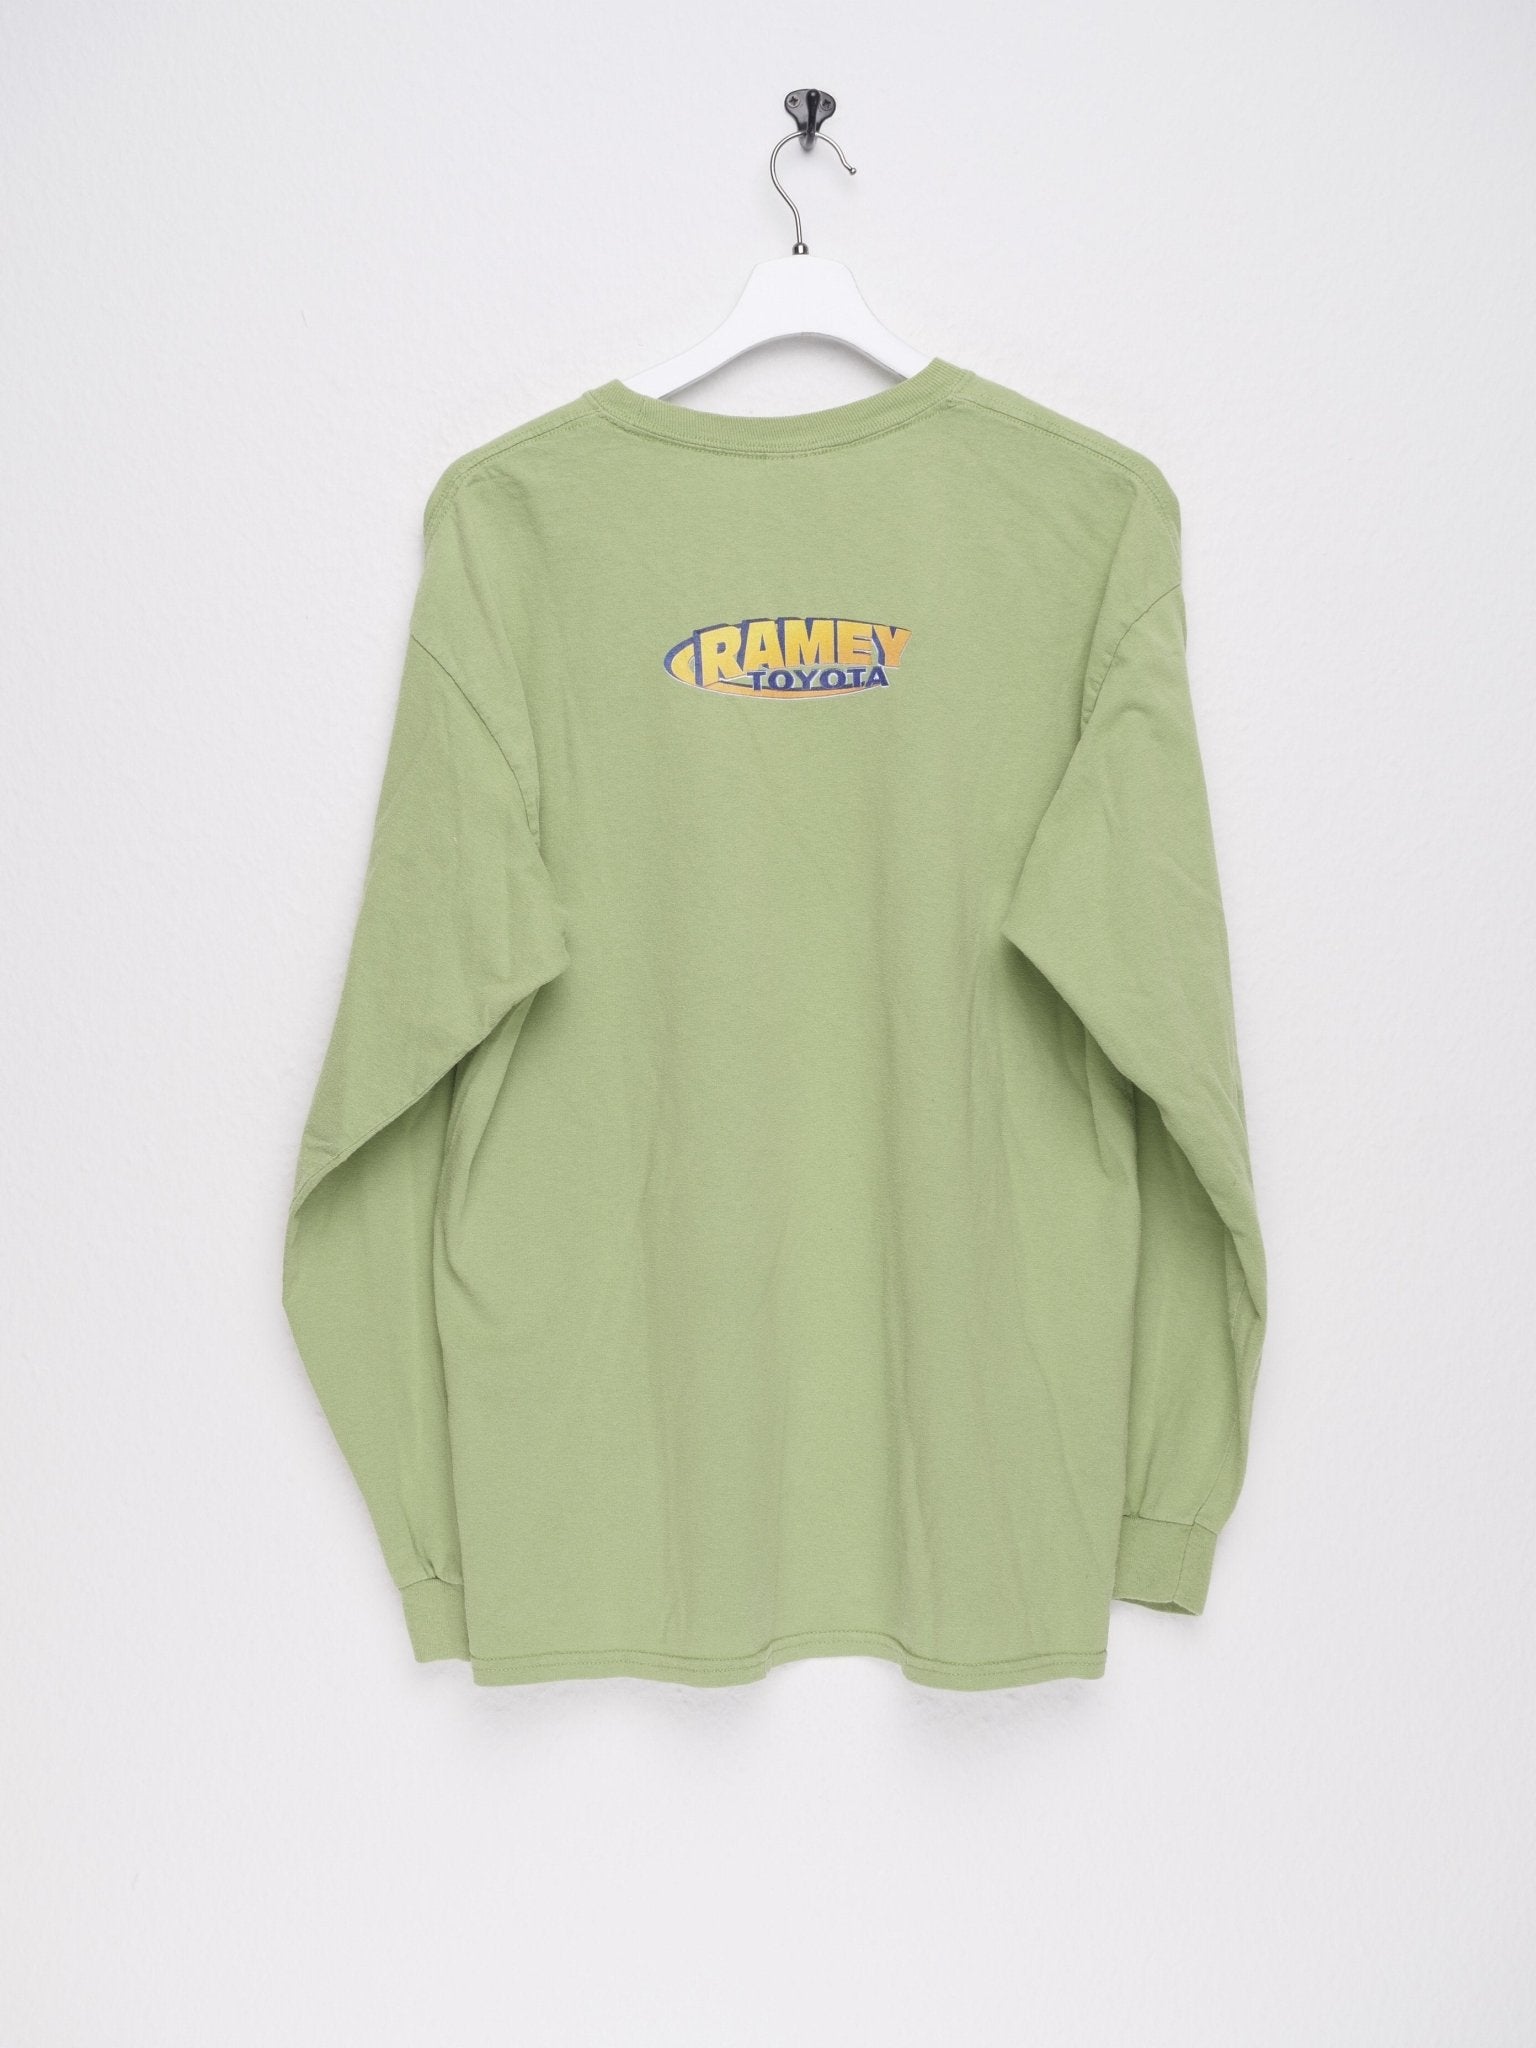 'PMCCC' printed Graphic green L/S Shirt - Peeces